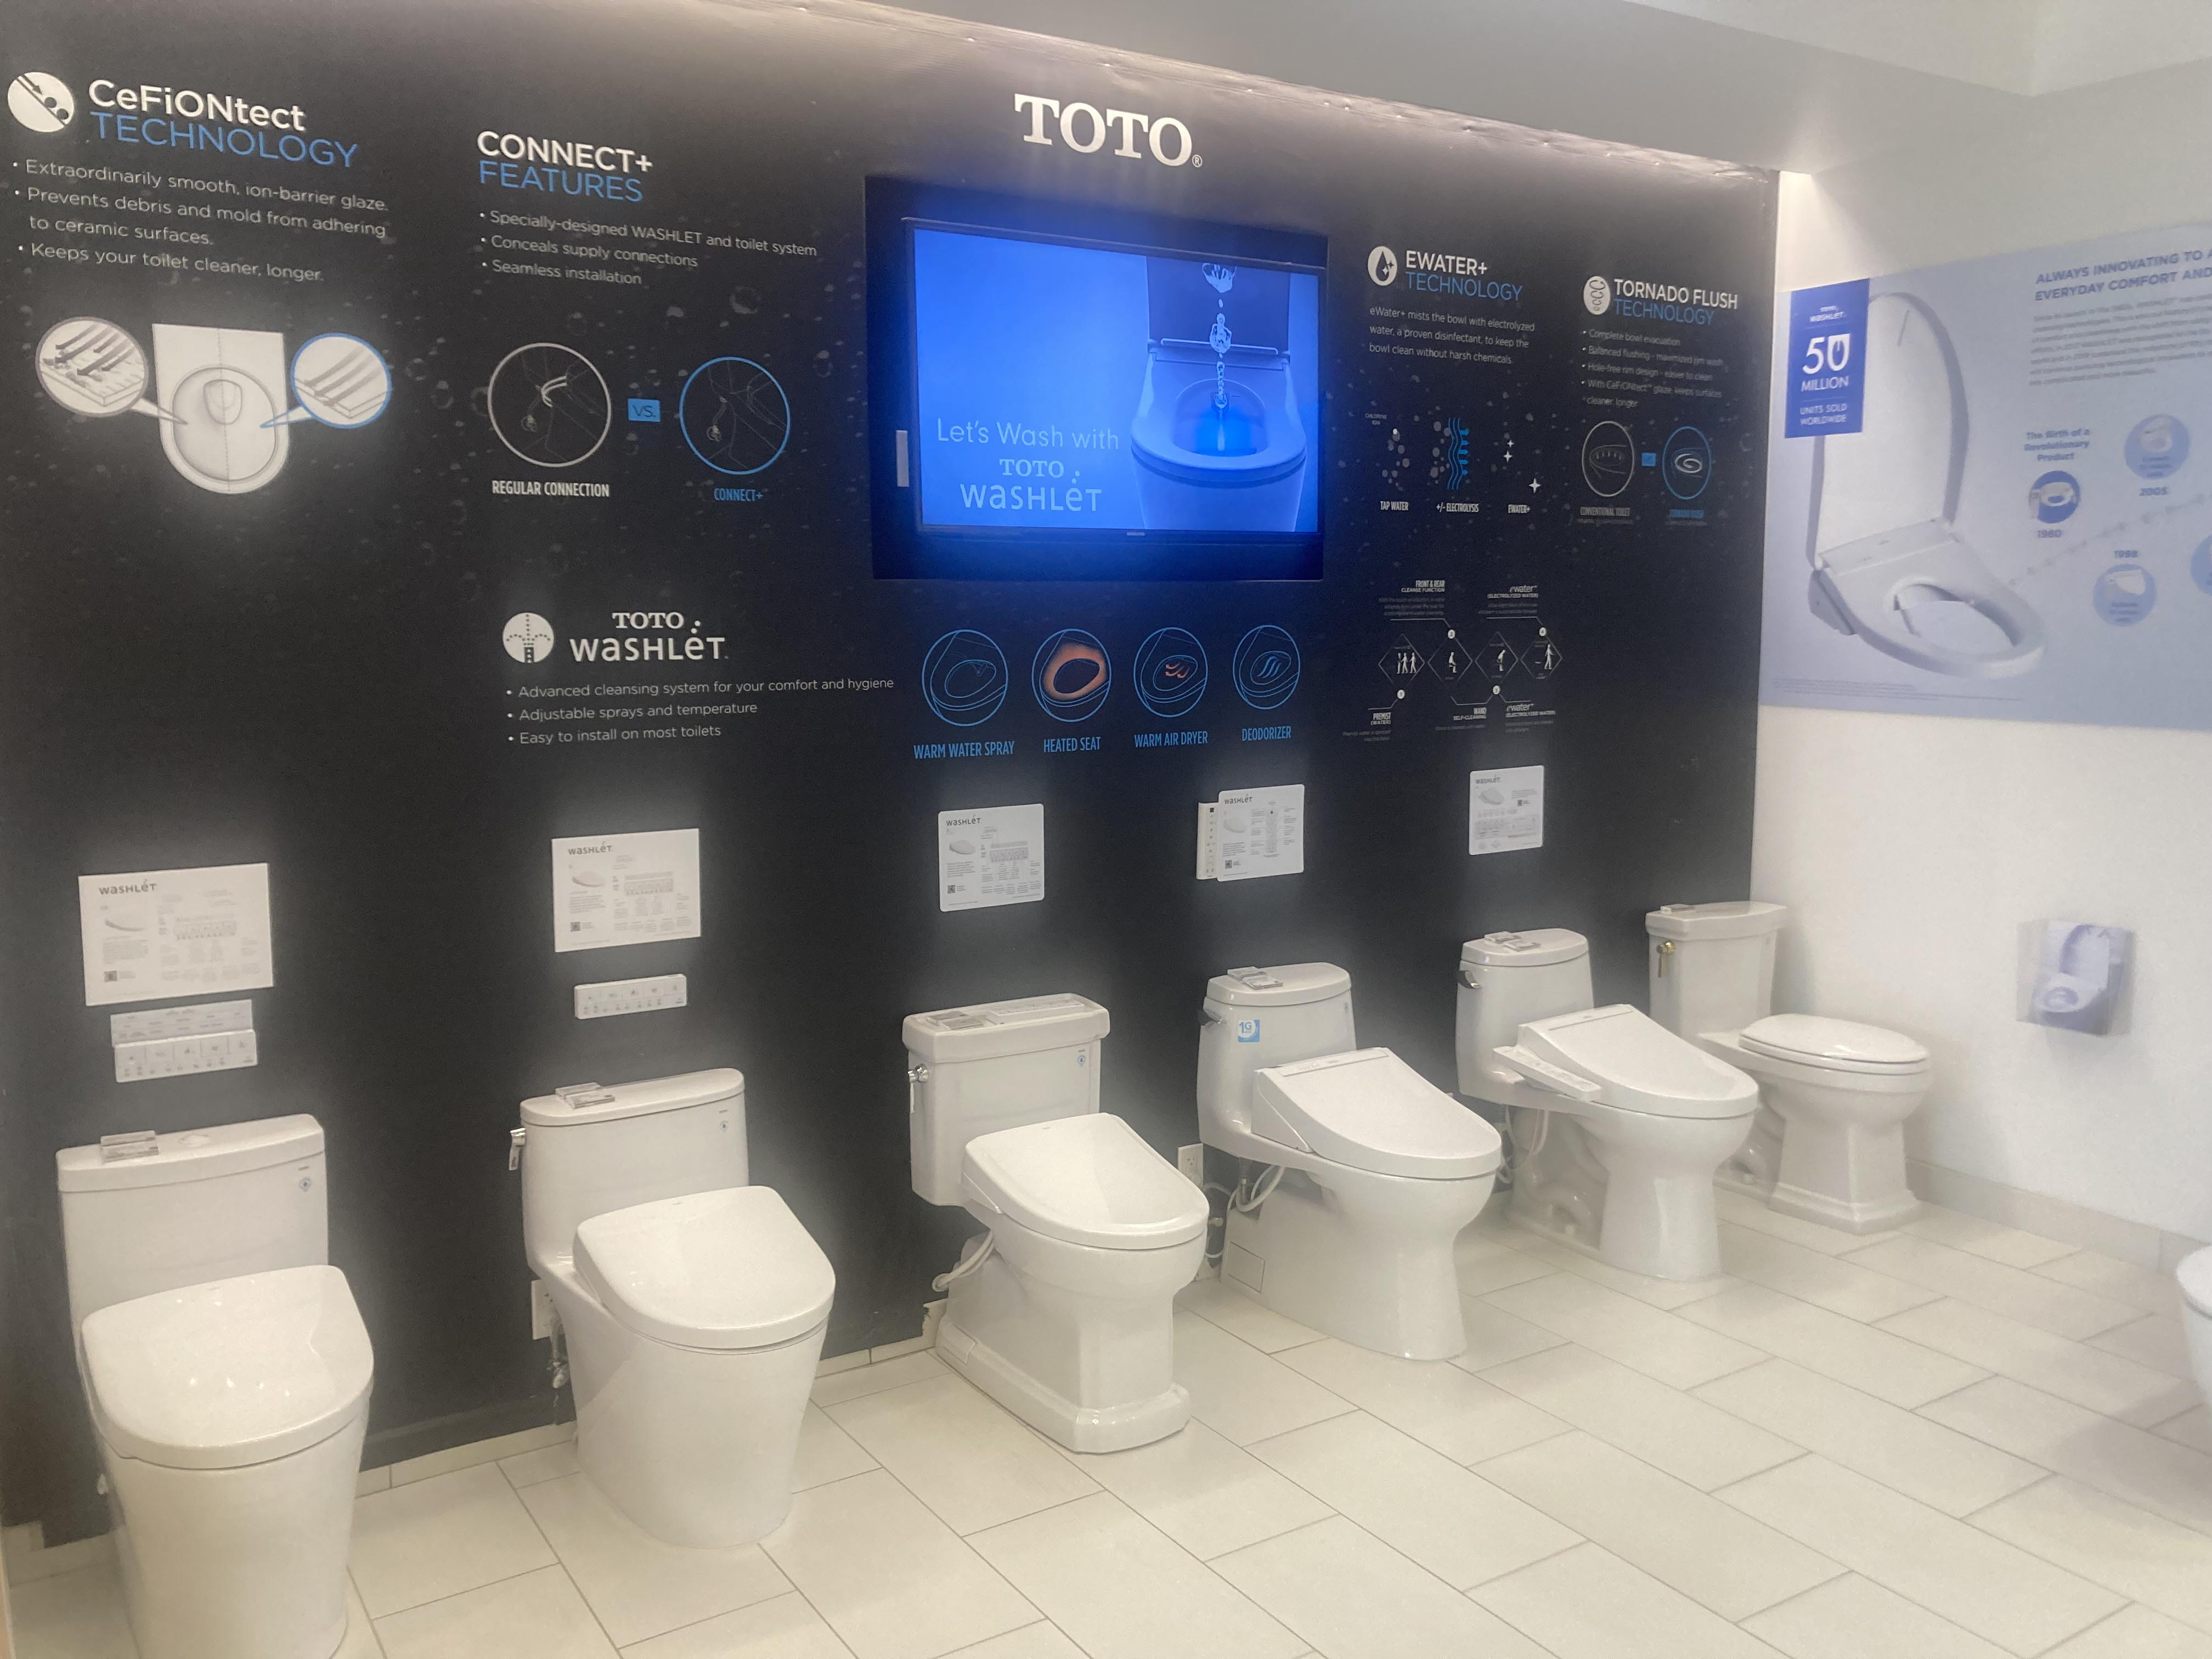 Toilets on display in front of wall with information and video screen